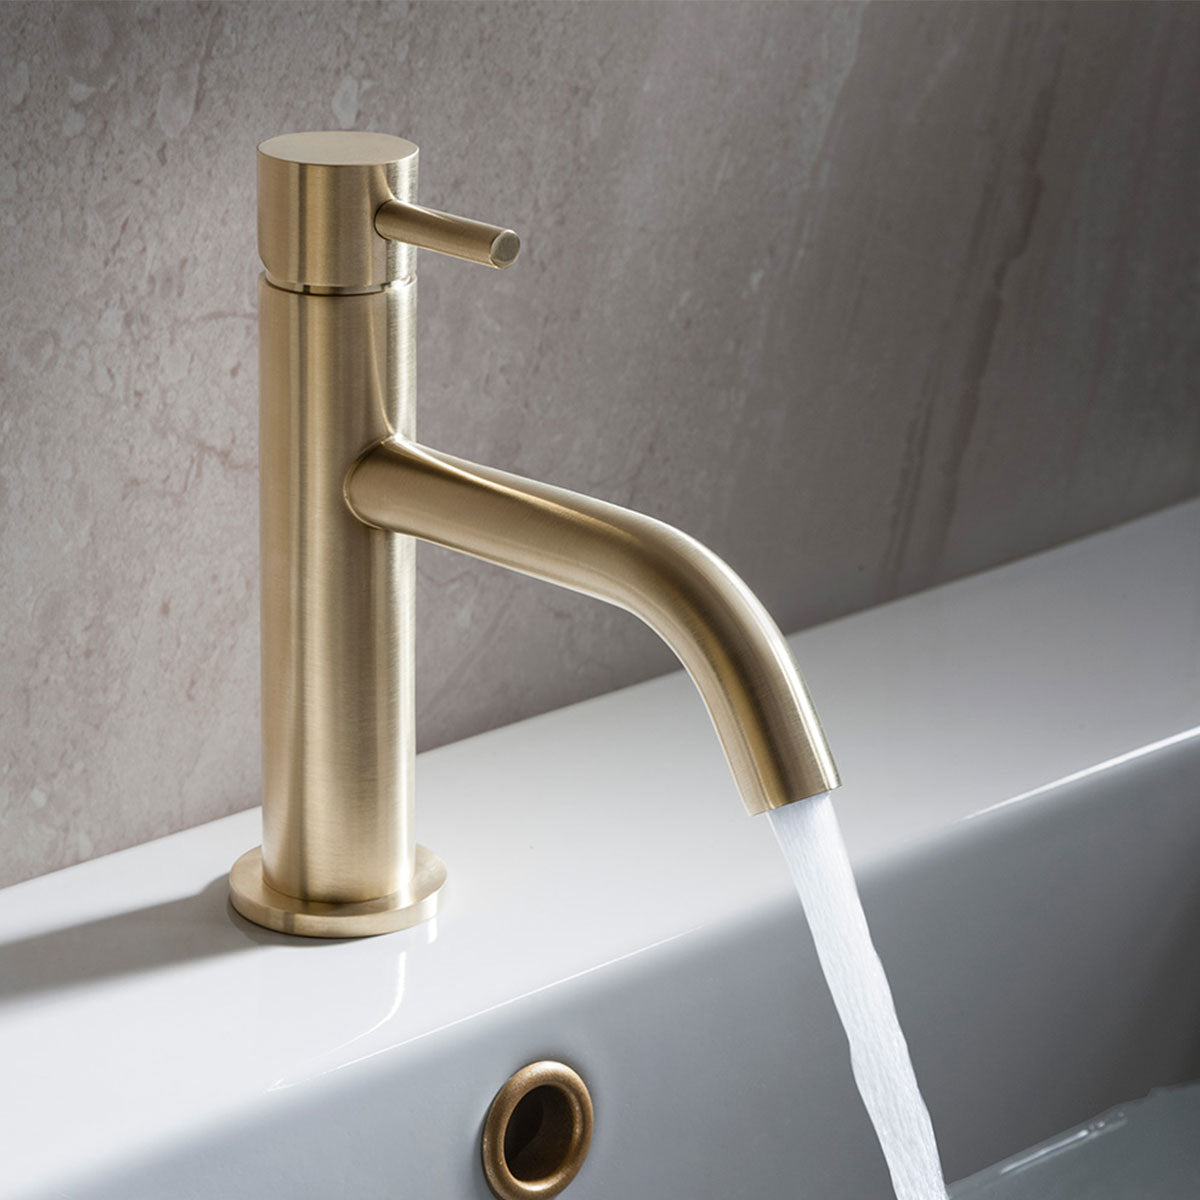 Brushed Brass Bathroom Edition, Taps, Mixers, Showers, Bathroom  Accessories